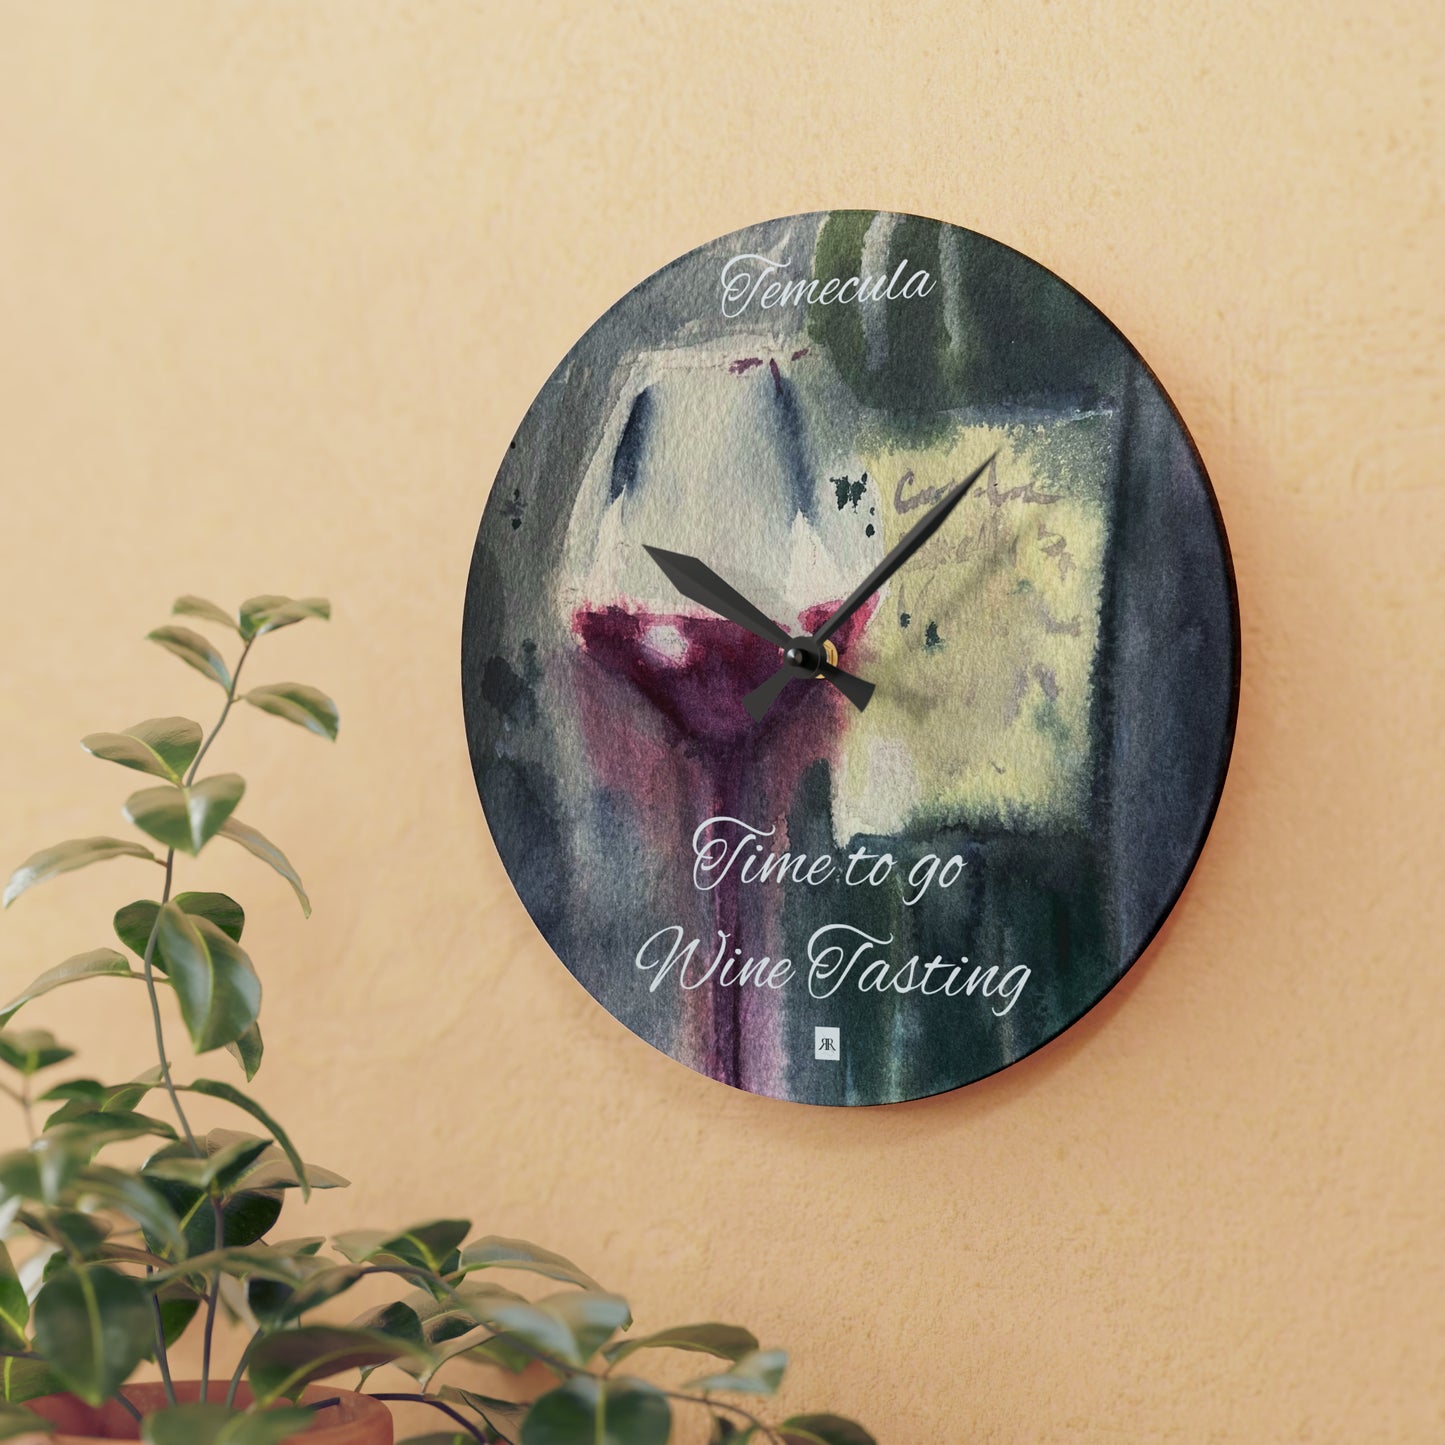 Temecula "Time to go Wine Tasting" Acrylic Wall Clock (white letters)